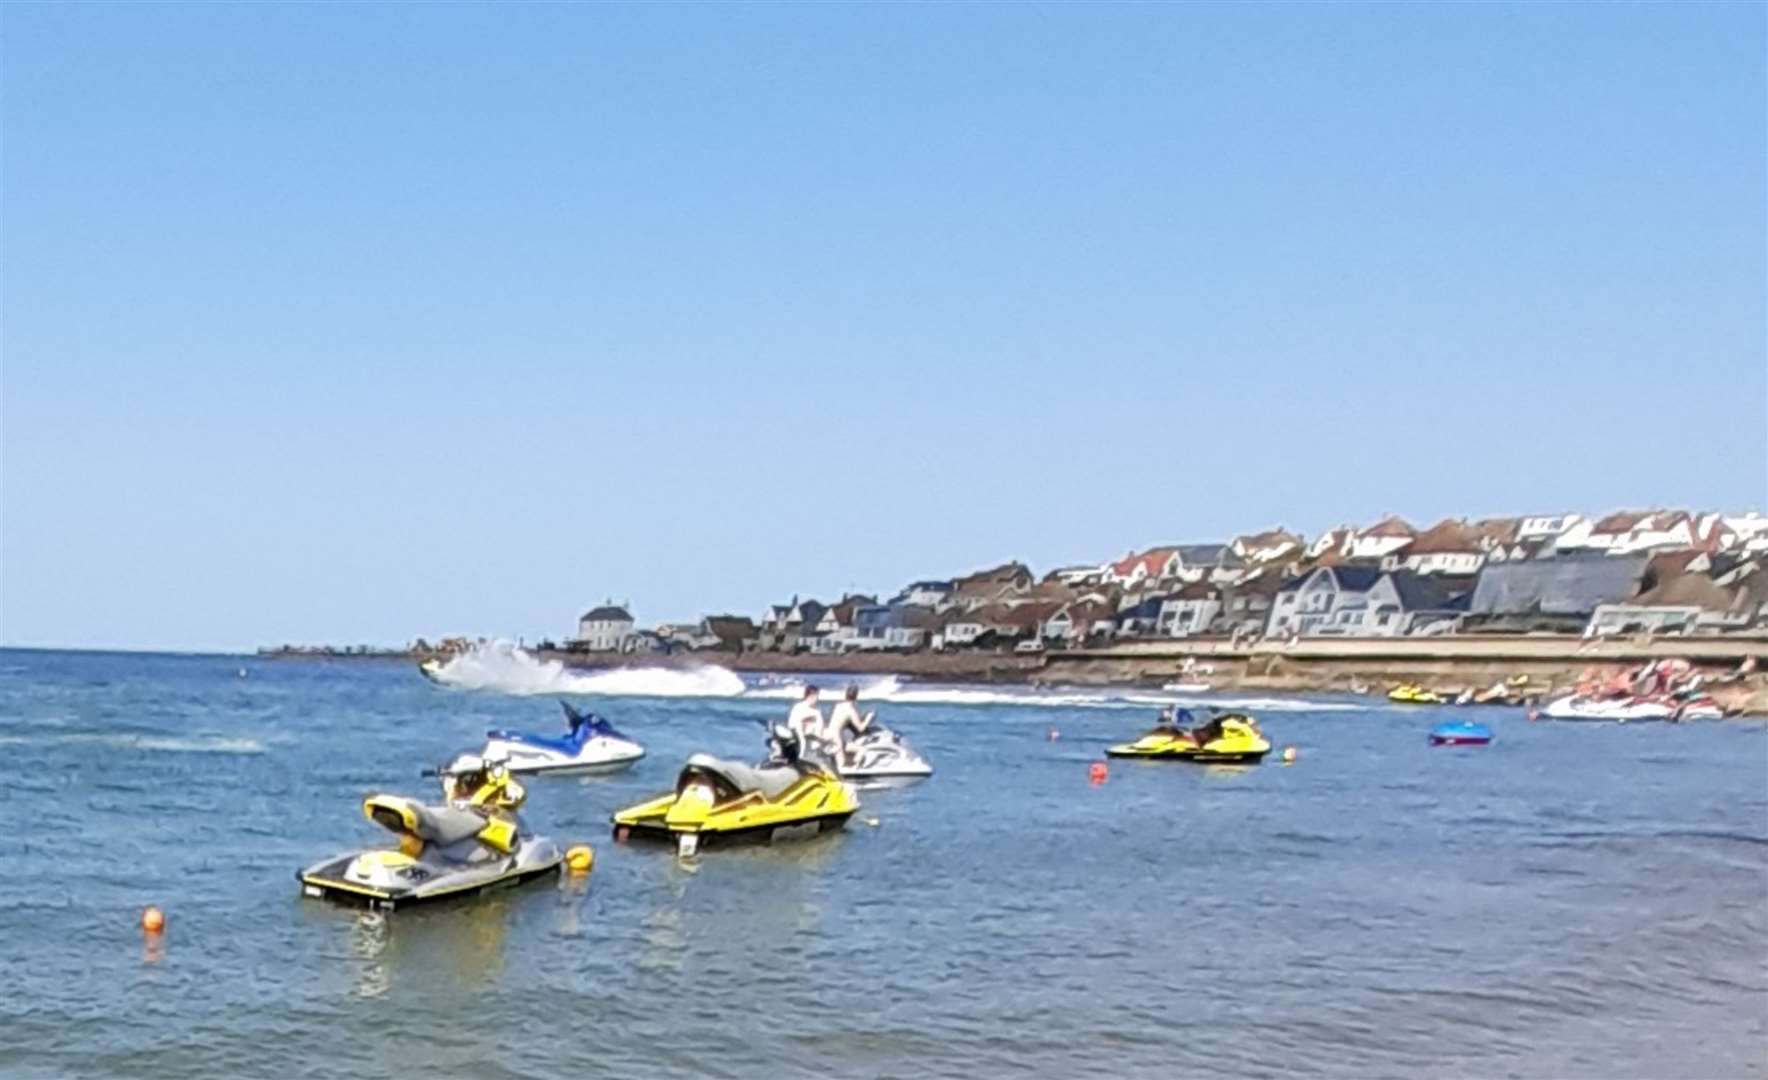 Hampton busy with jet skis last month